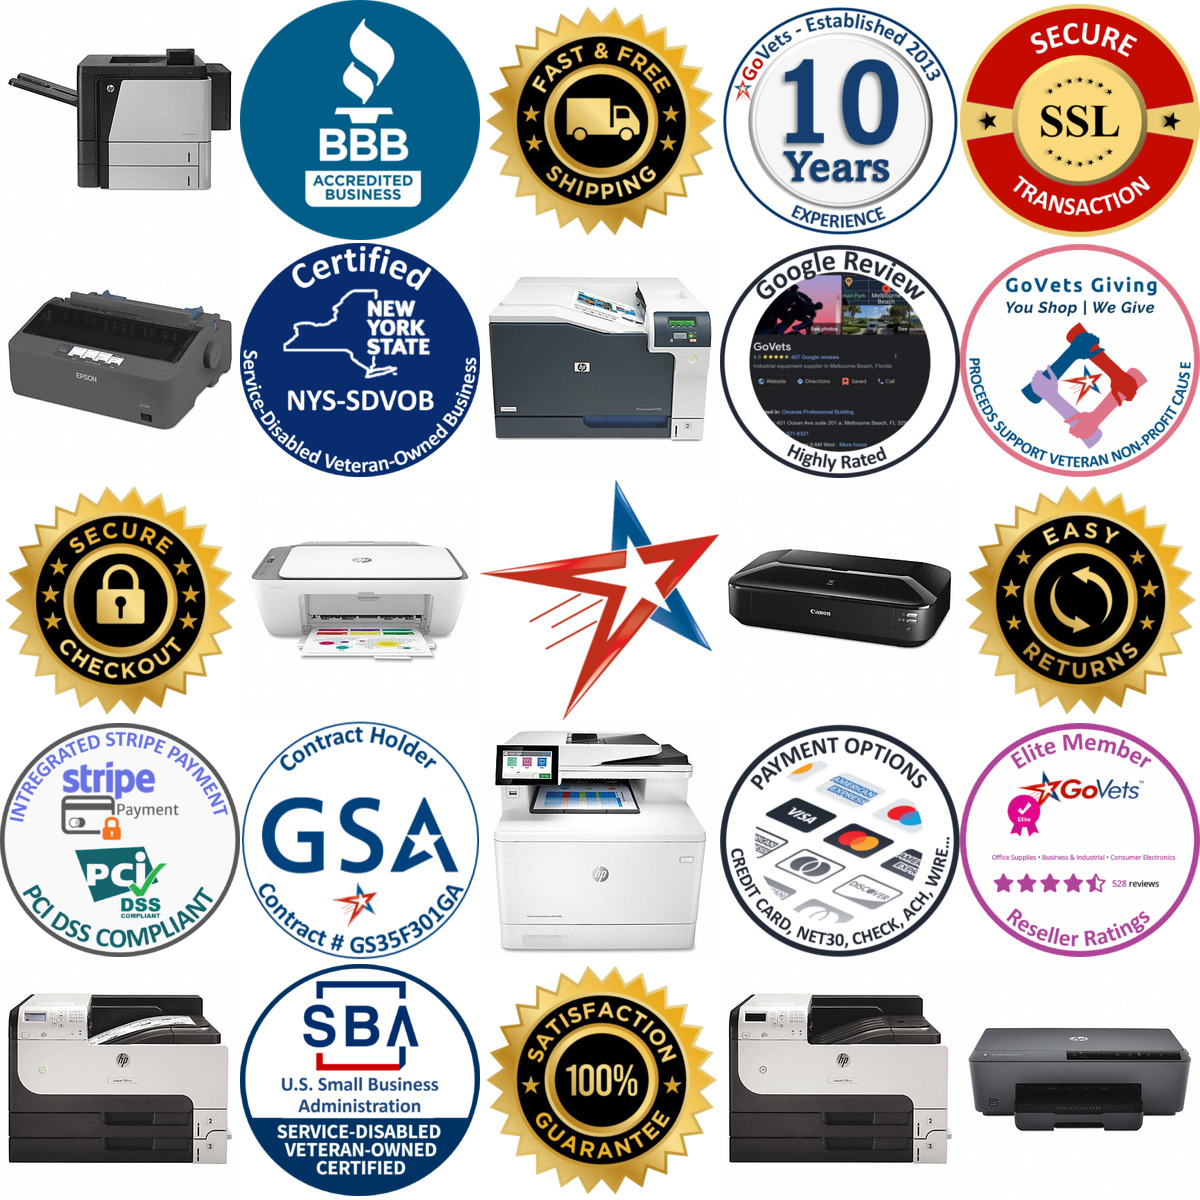 A selection of Printers products on GoVets